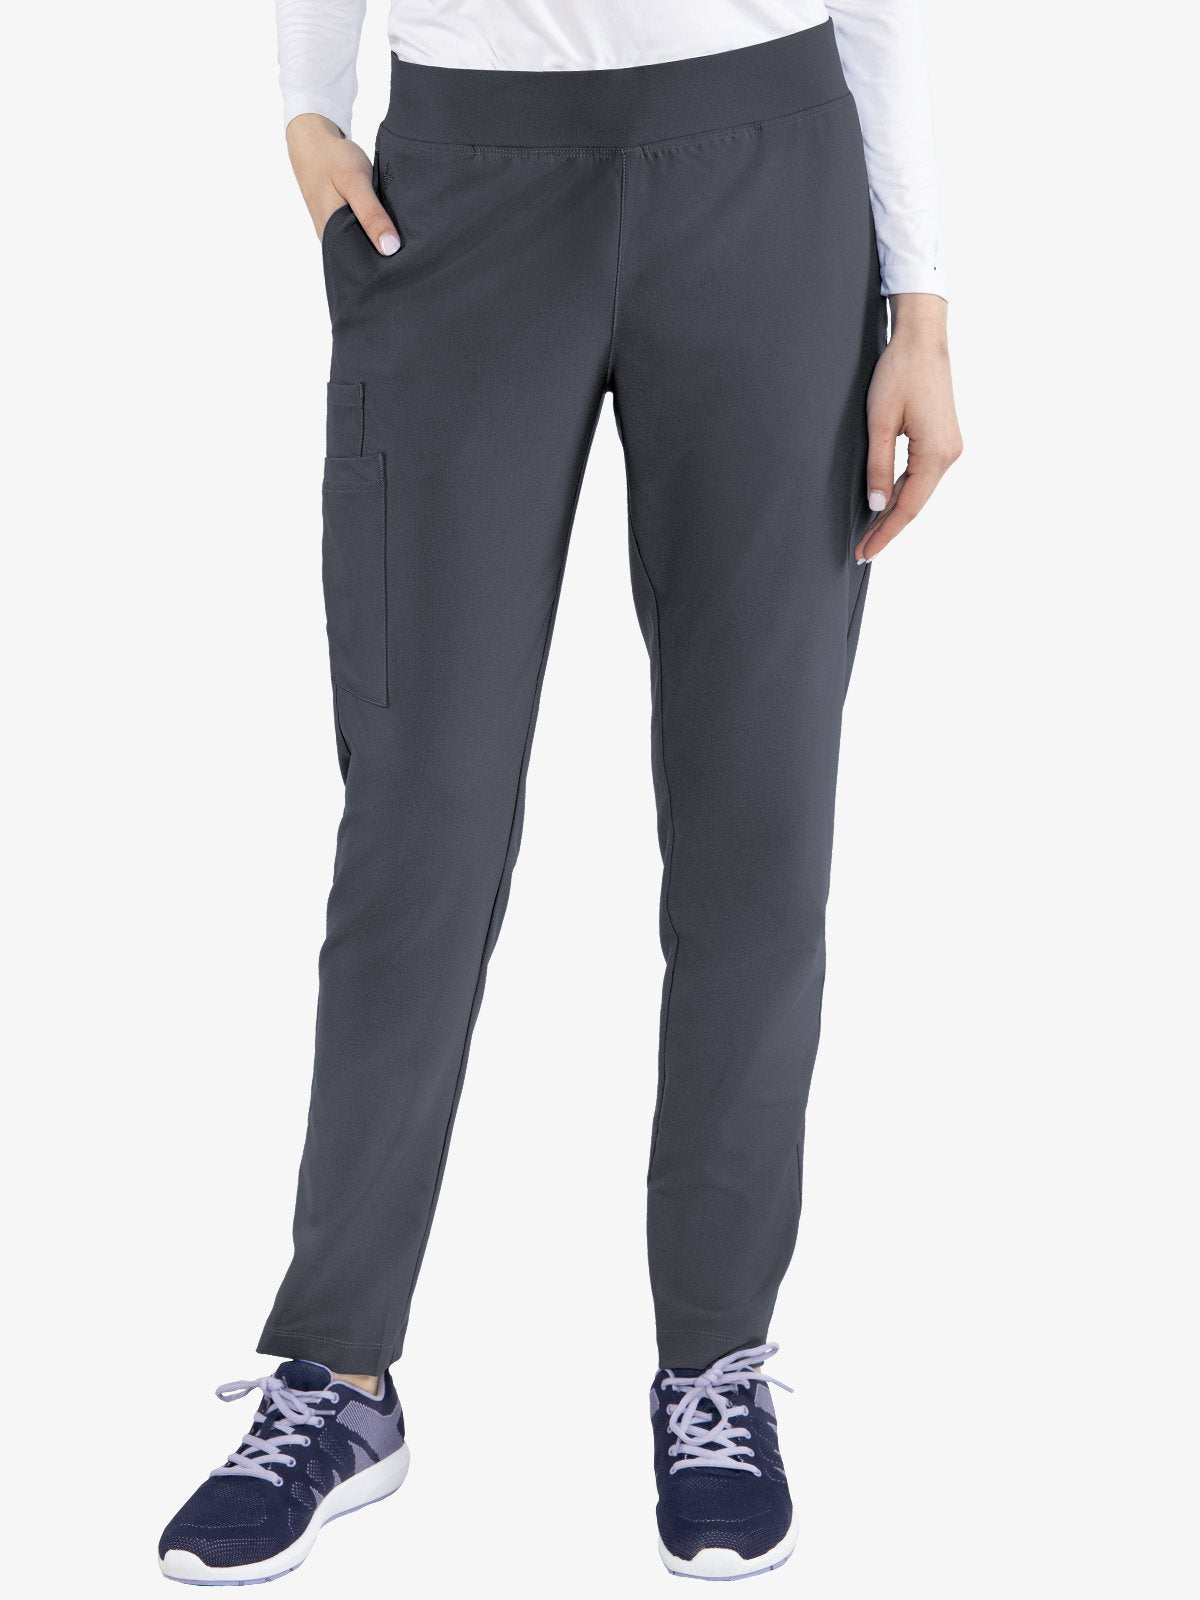 Austin Comfort Pant by Med Couture XS-3XL / Pewter